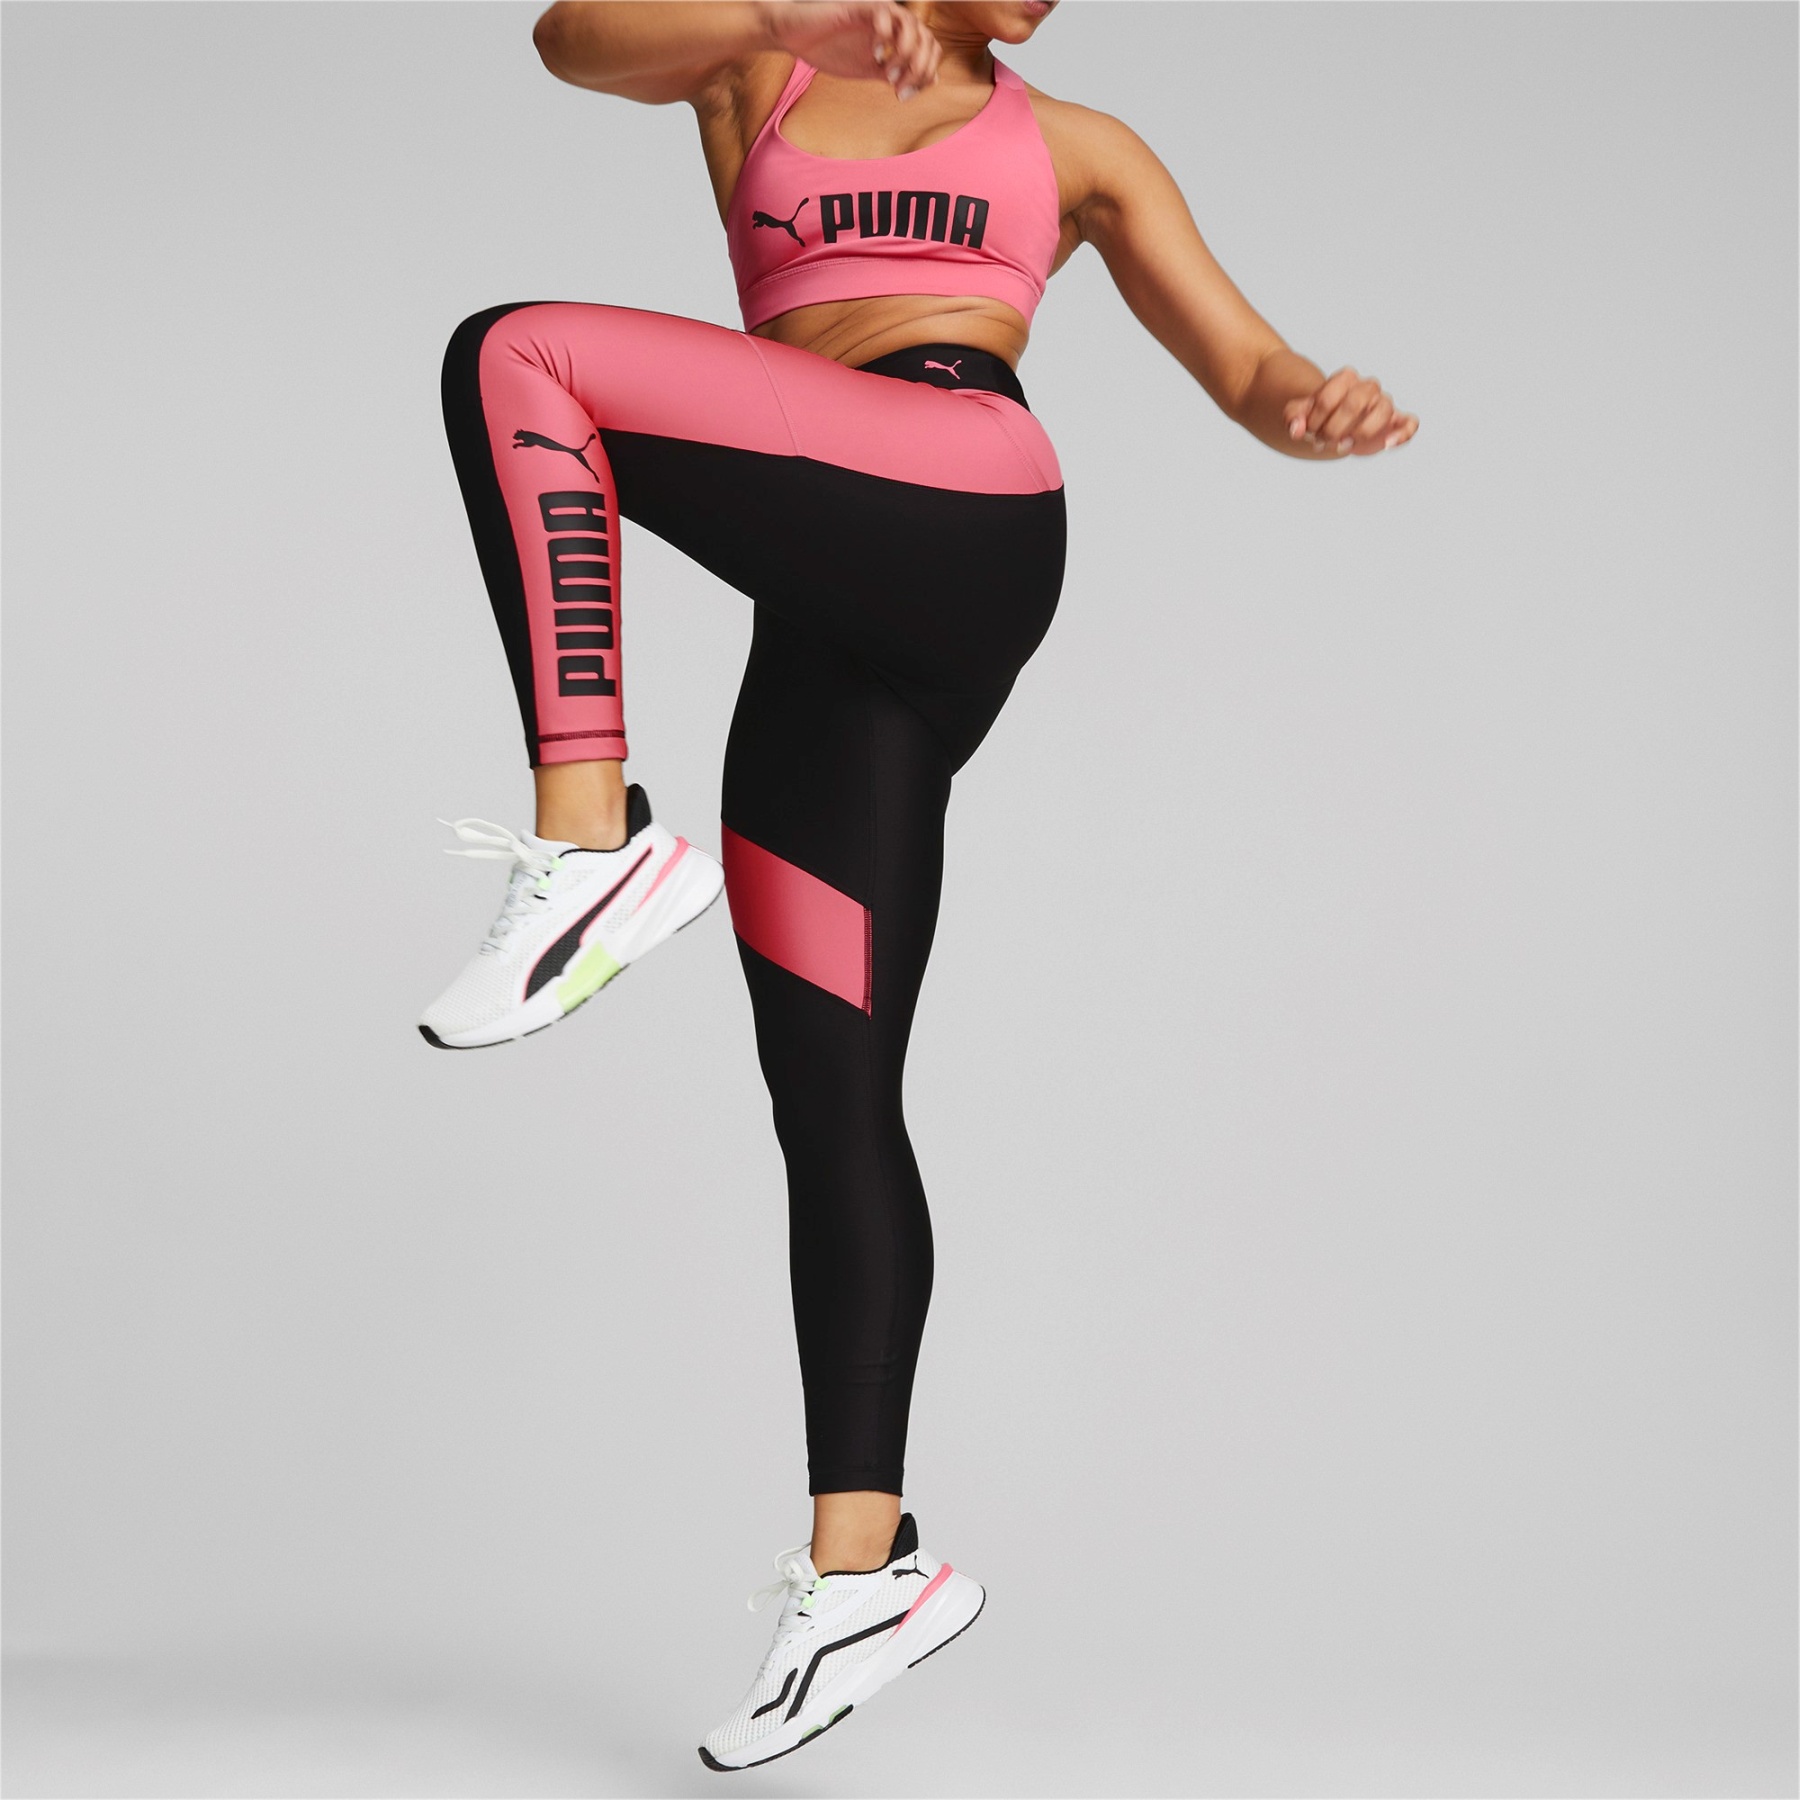 PUMA Solid Women Black Tights - Buy PUMA Solid Women Black Tights Online at  Best Prices in India | Flipkart.com